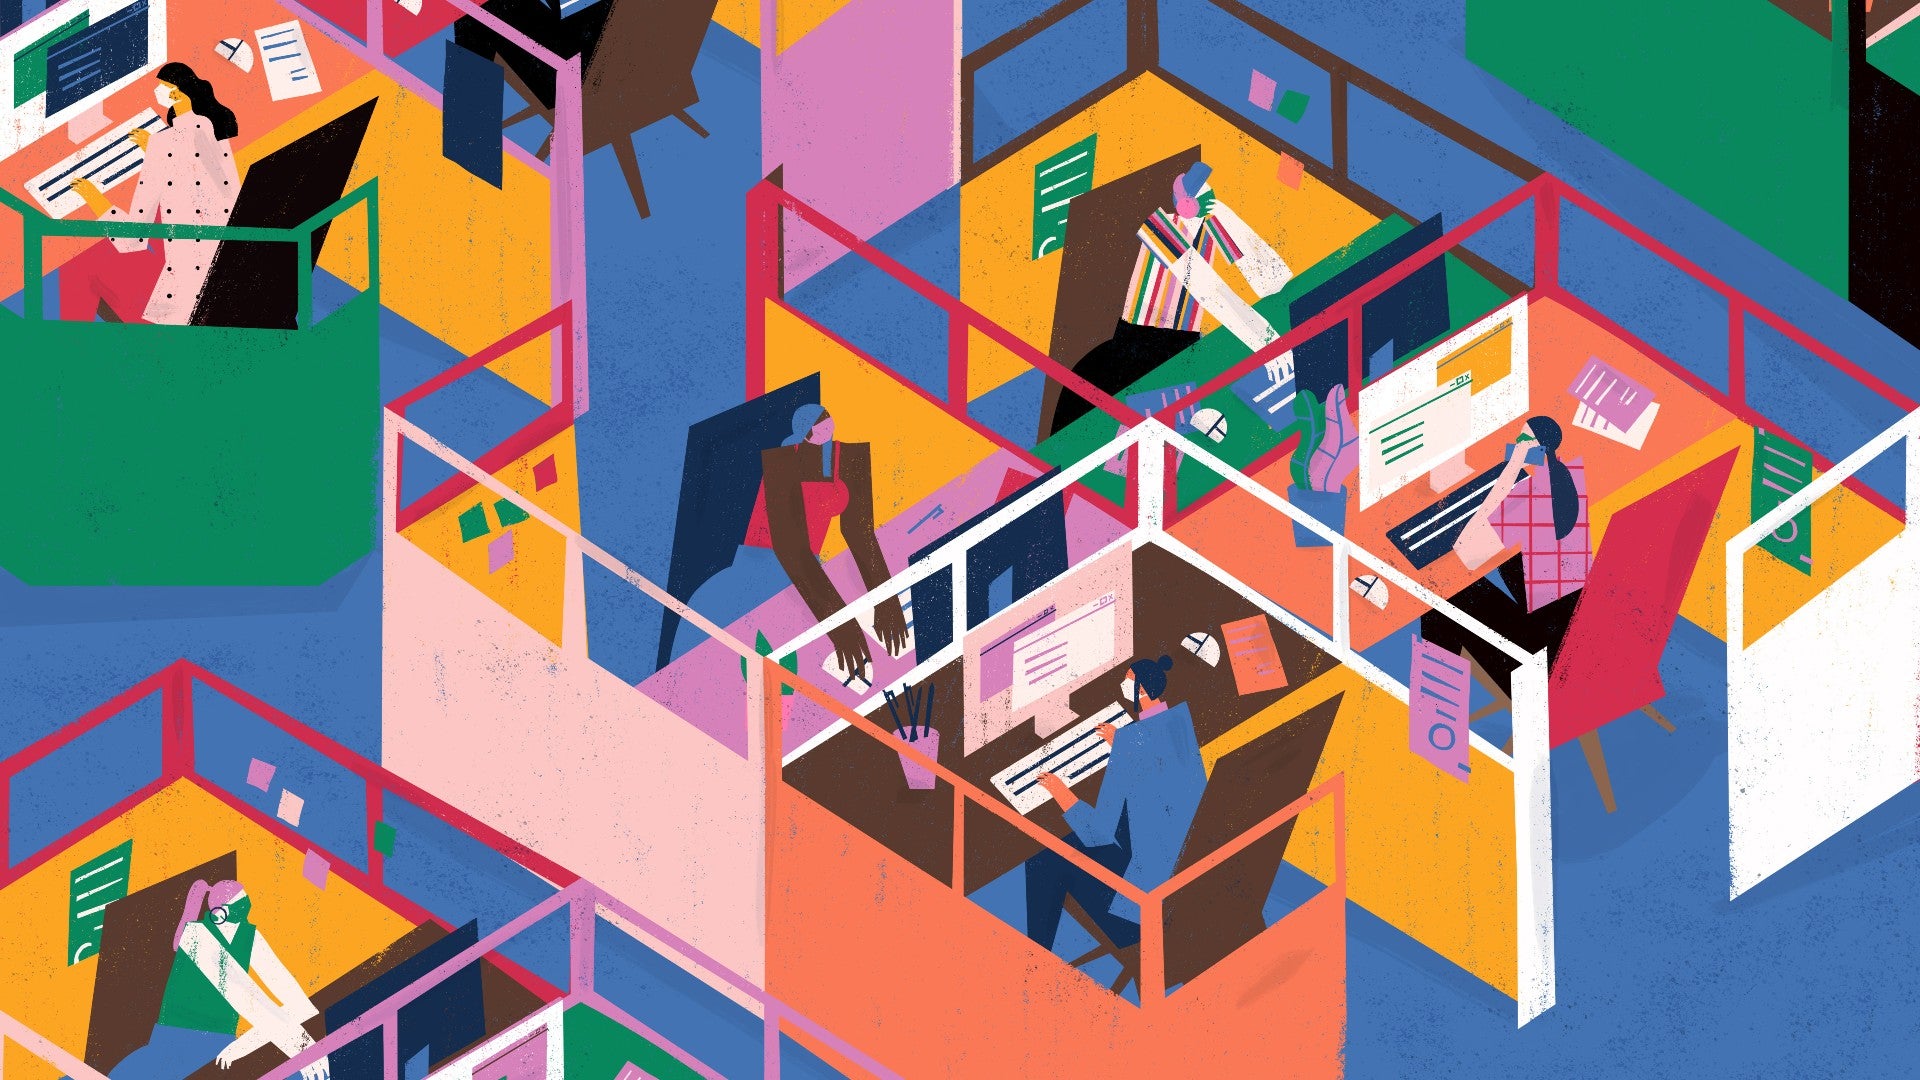 Stylized art of a diverse group of people working in cubicles